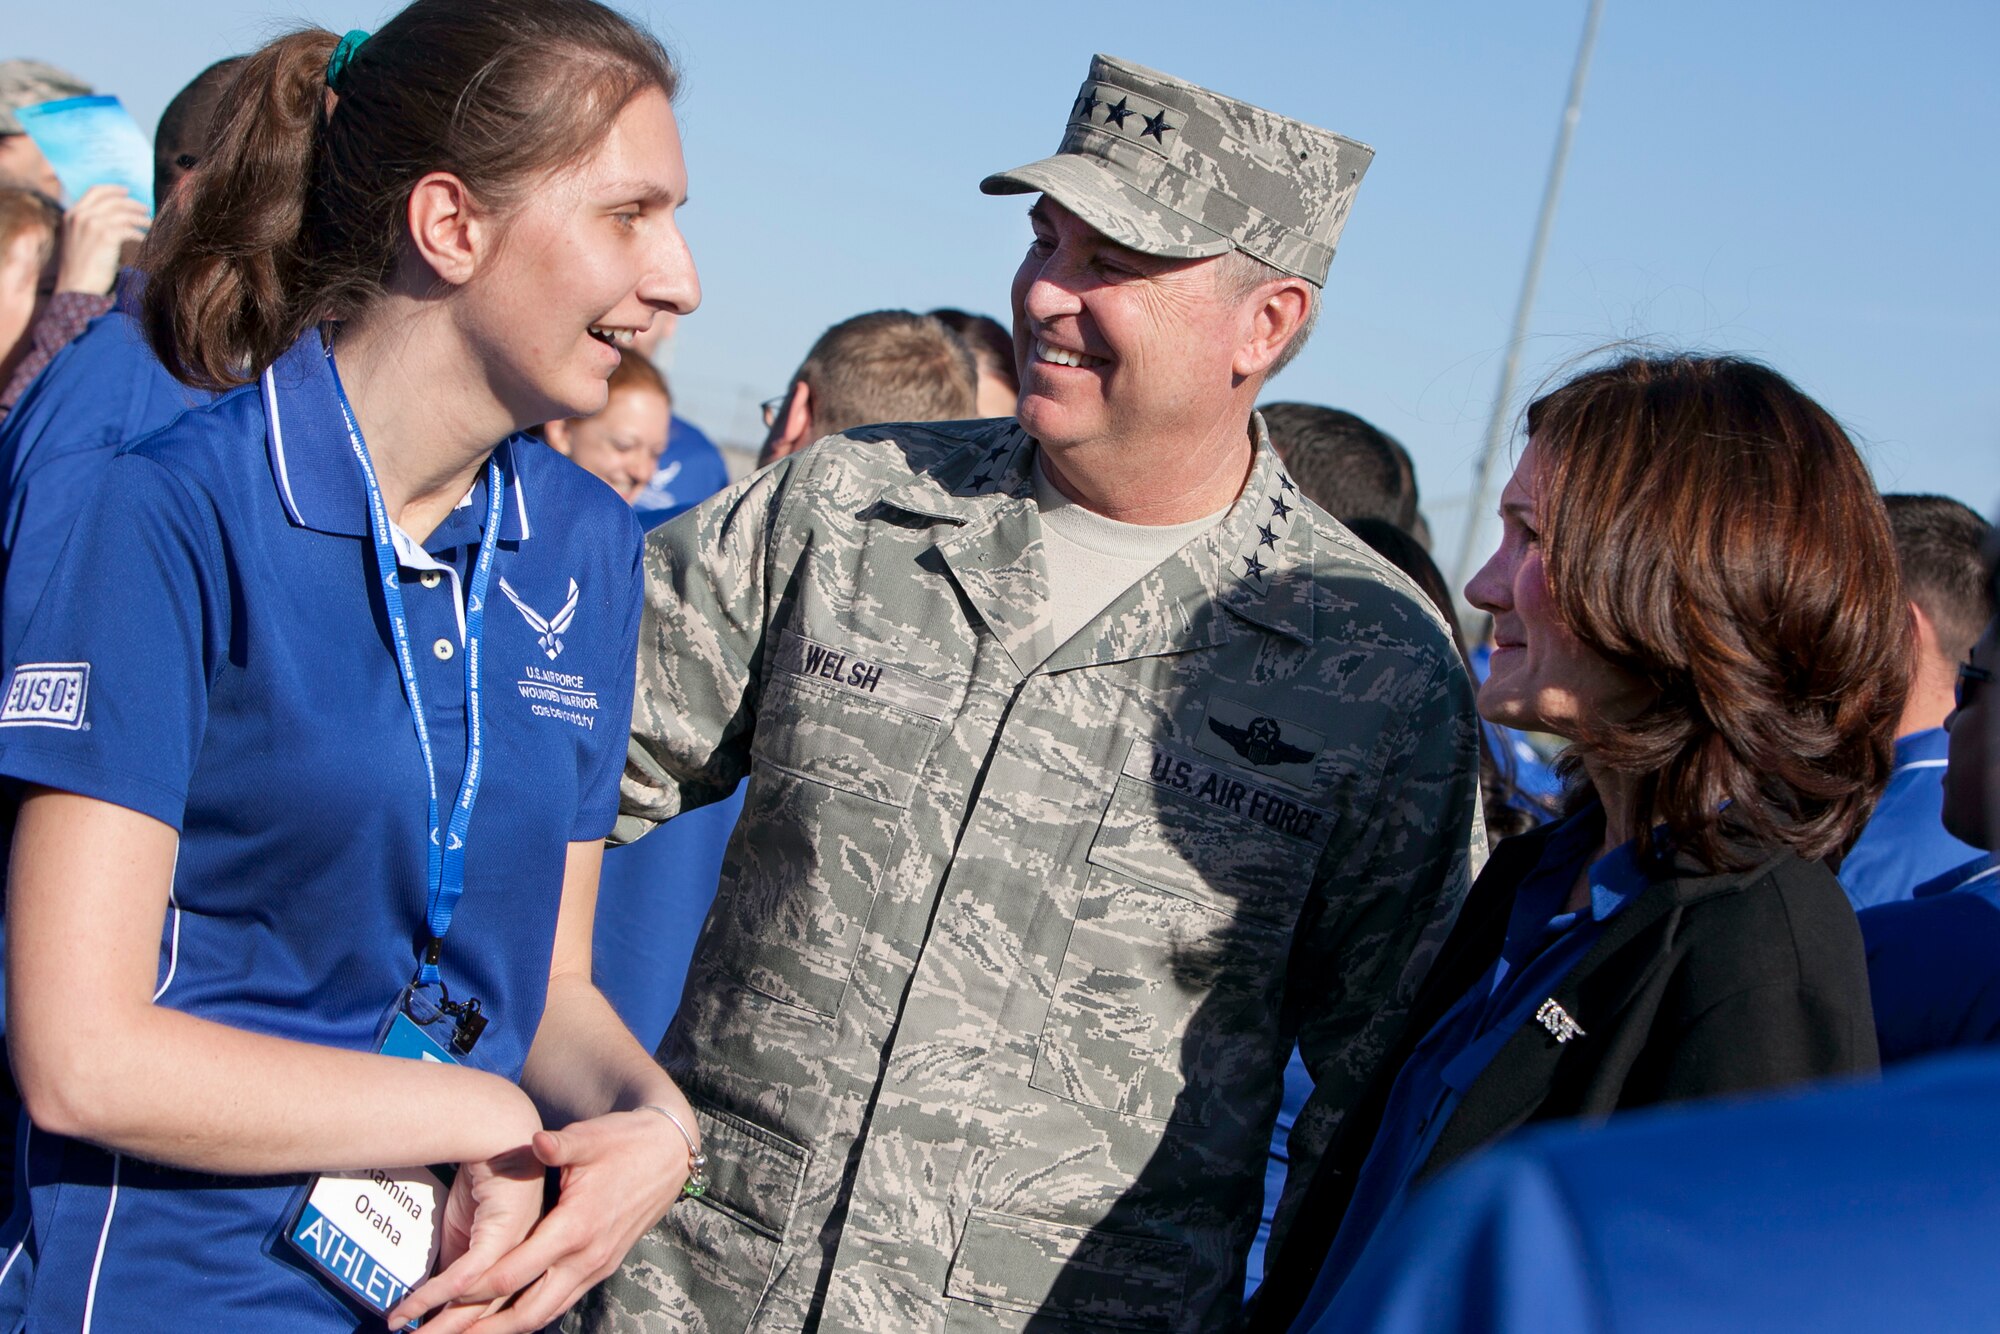 Air Force Chief of Staff Gen. Mark A. Welsh III and his wife, Betty Welsh, speak with Ramina Oraha April 7, 2014, at Nellis Air Force Base, Nev. Oraha will be competing in the an Air Force Wounded Warrior Trials. (U.S. Air Force photo/Lorenz Crespo)
